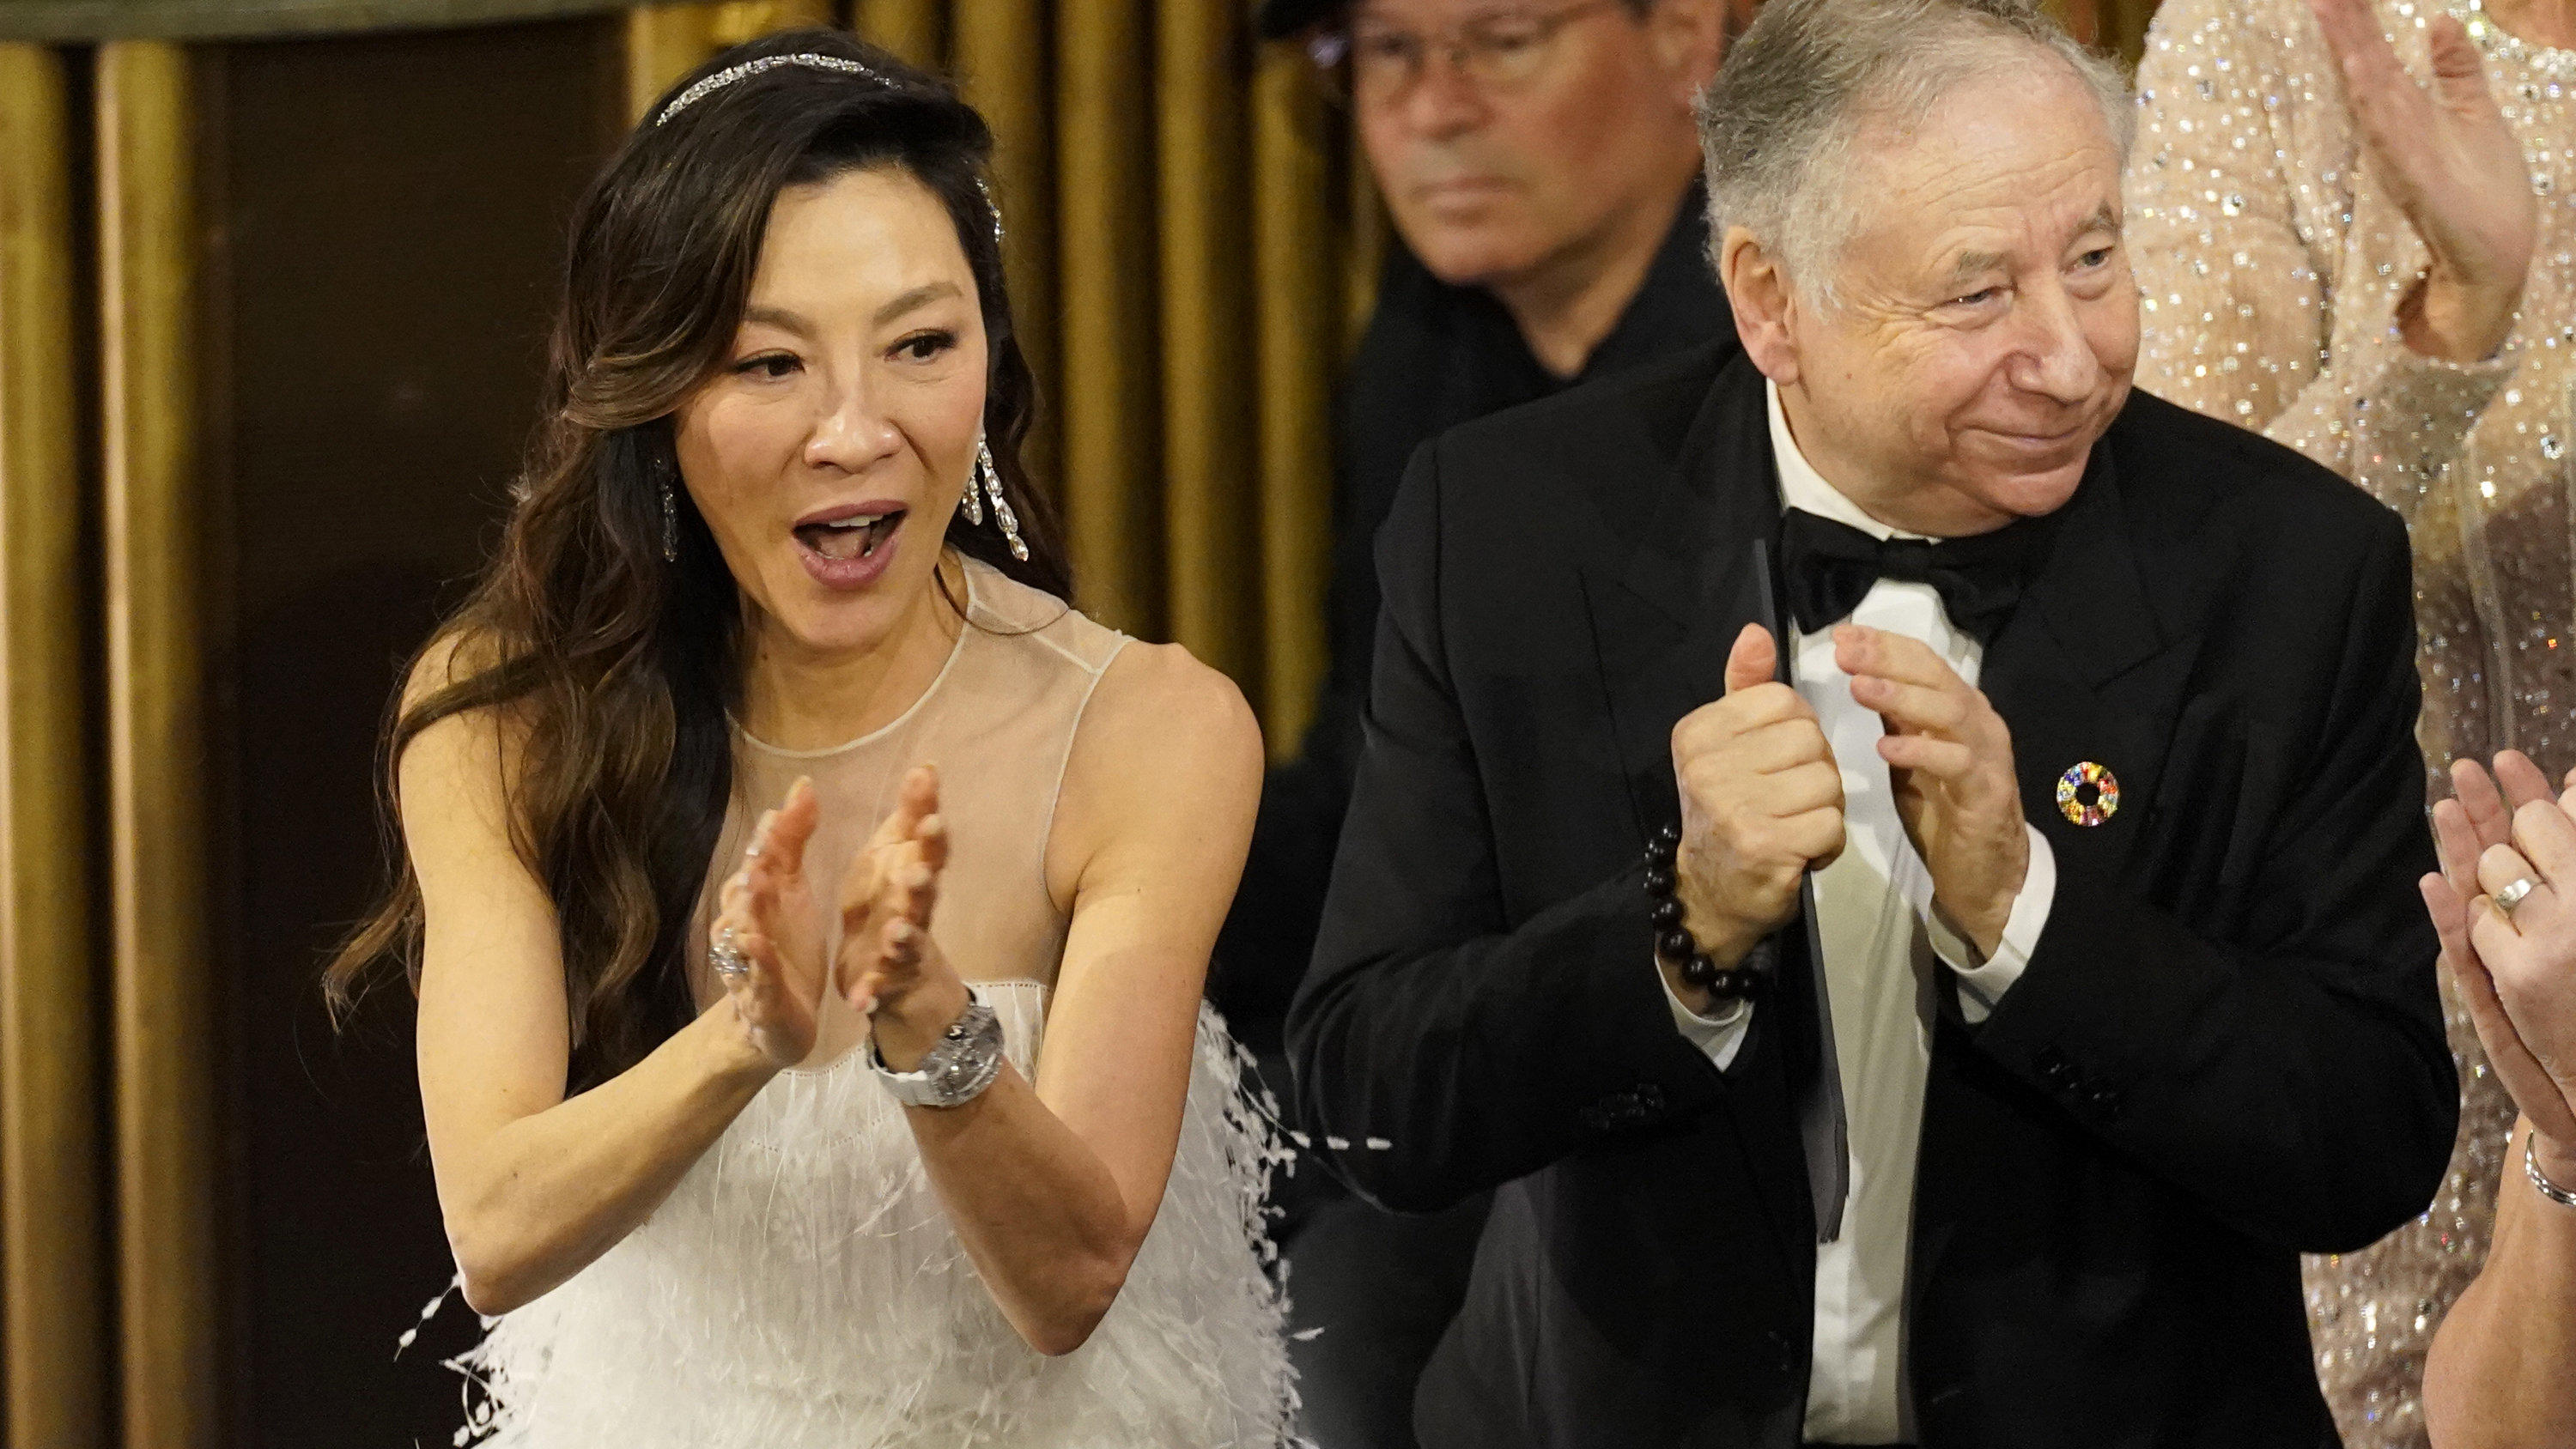 Michelle Yeoh, left, and Jean Todt, cheer in the audience at the Oscars on Sunday, March 12, 2023, at the Dolby Theatre in Los Angeles. (AP Photo/Chris Pizzello)